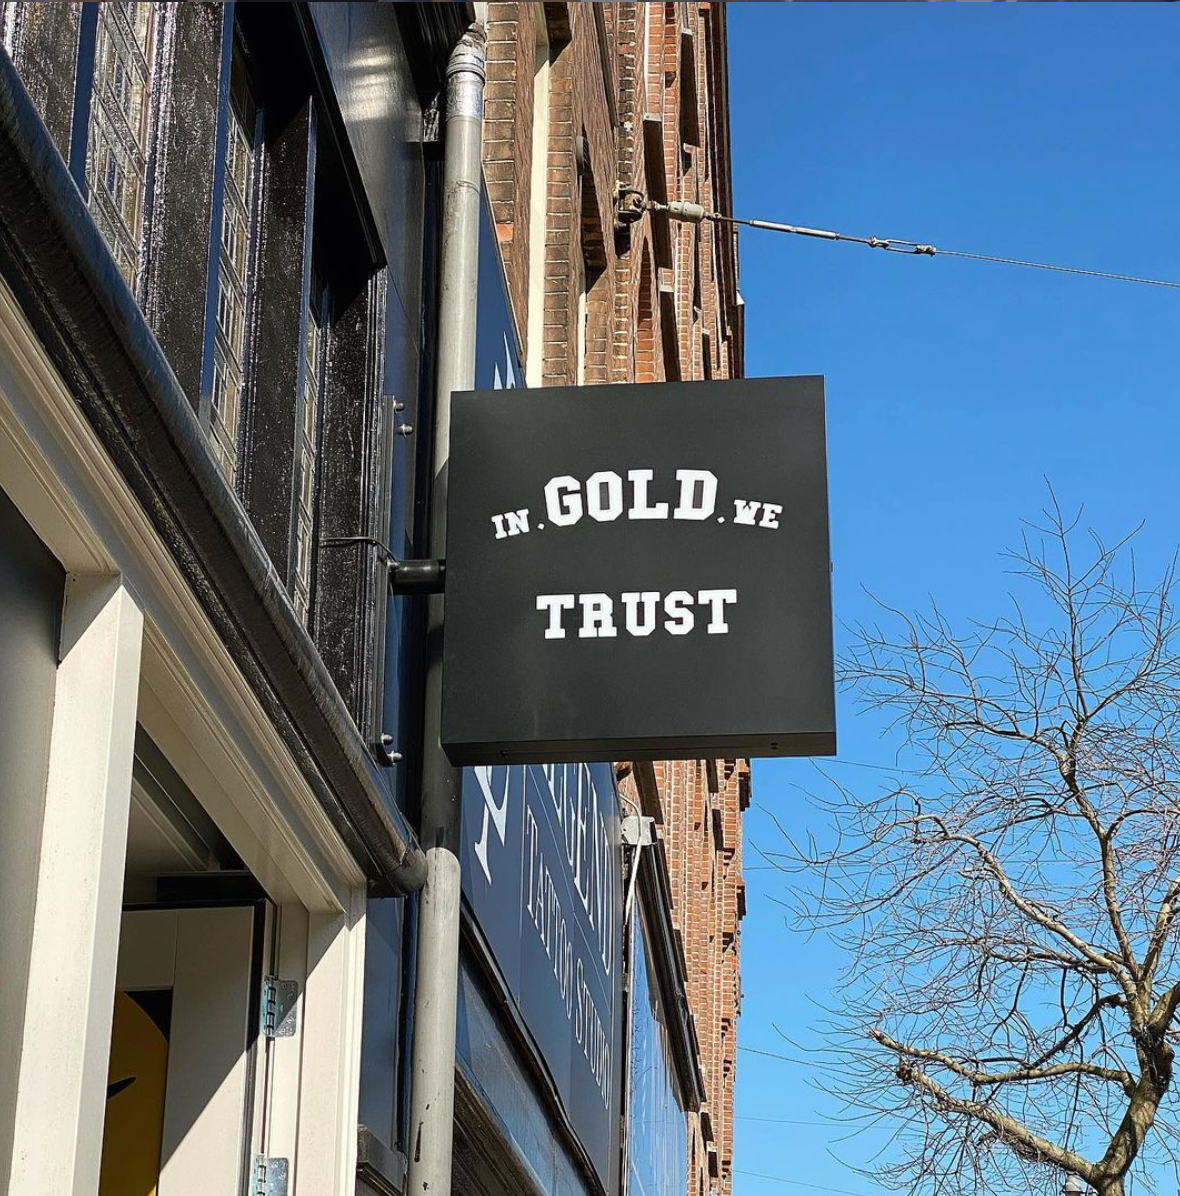 At the rear of the first In Gold We Trust store, there is a work-out area